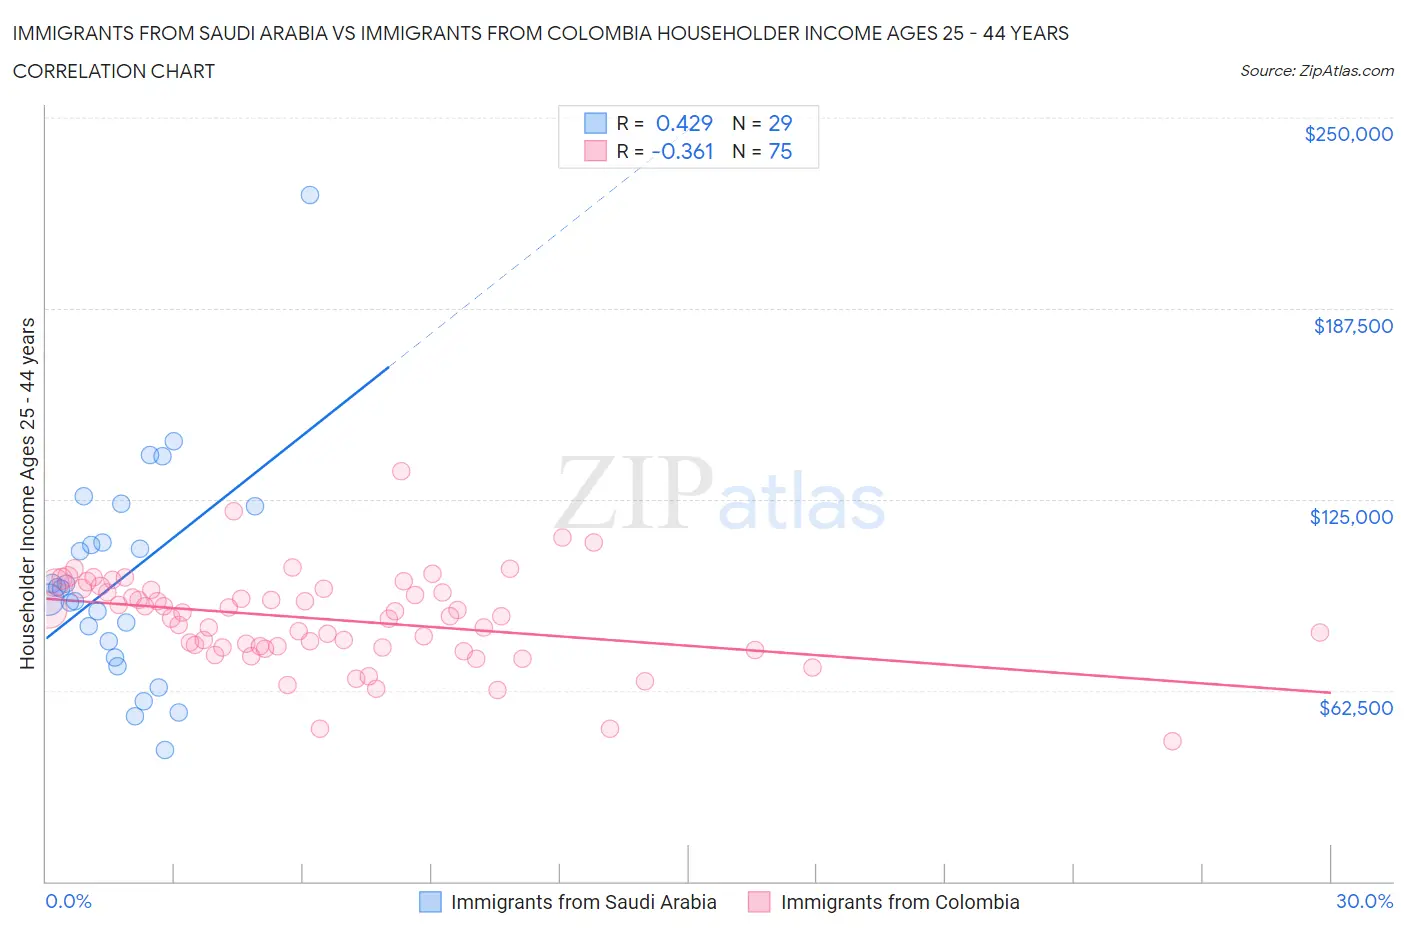 Immigrants from Saudi Arabia vs Immigrants from Colombia Householder Income Ages 25 - 44 years